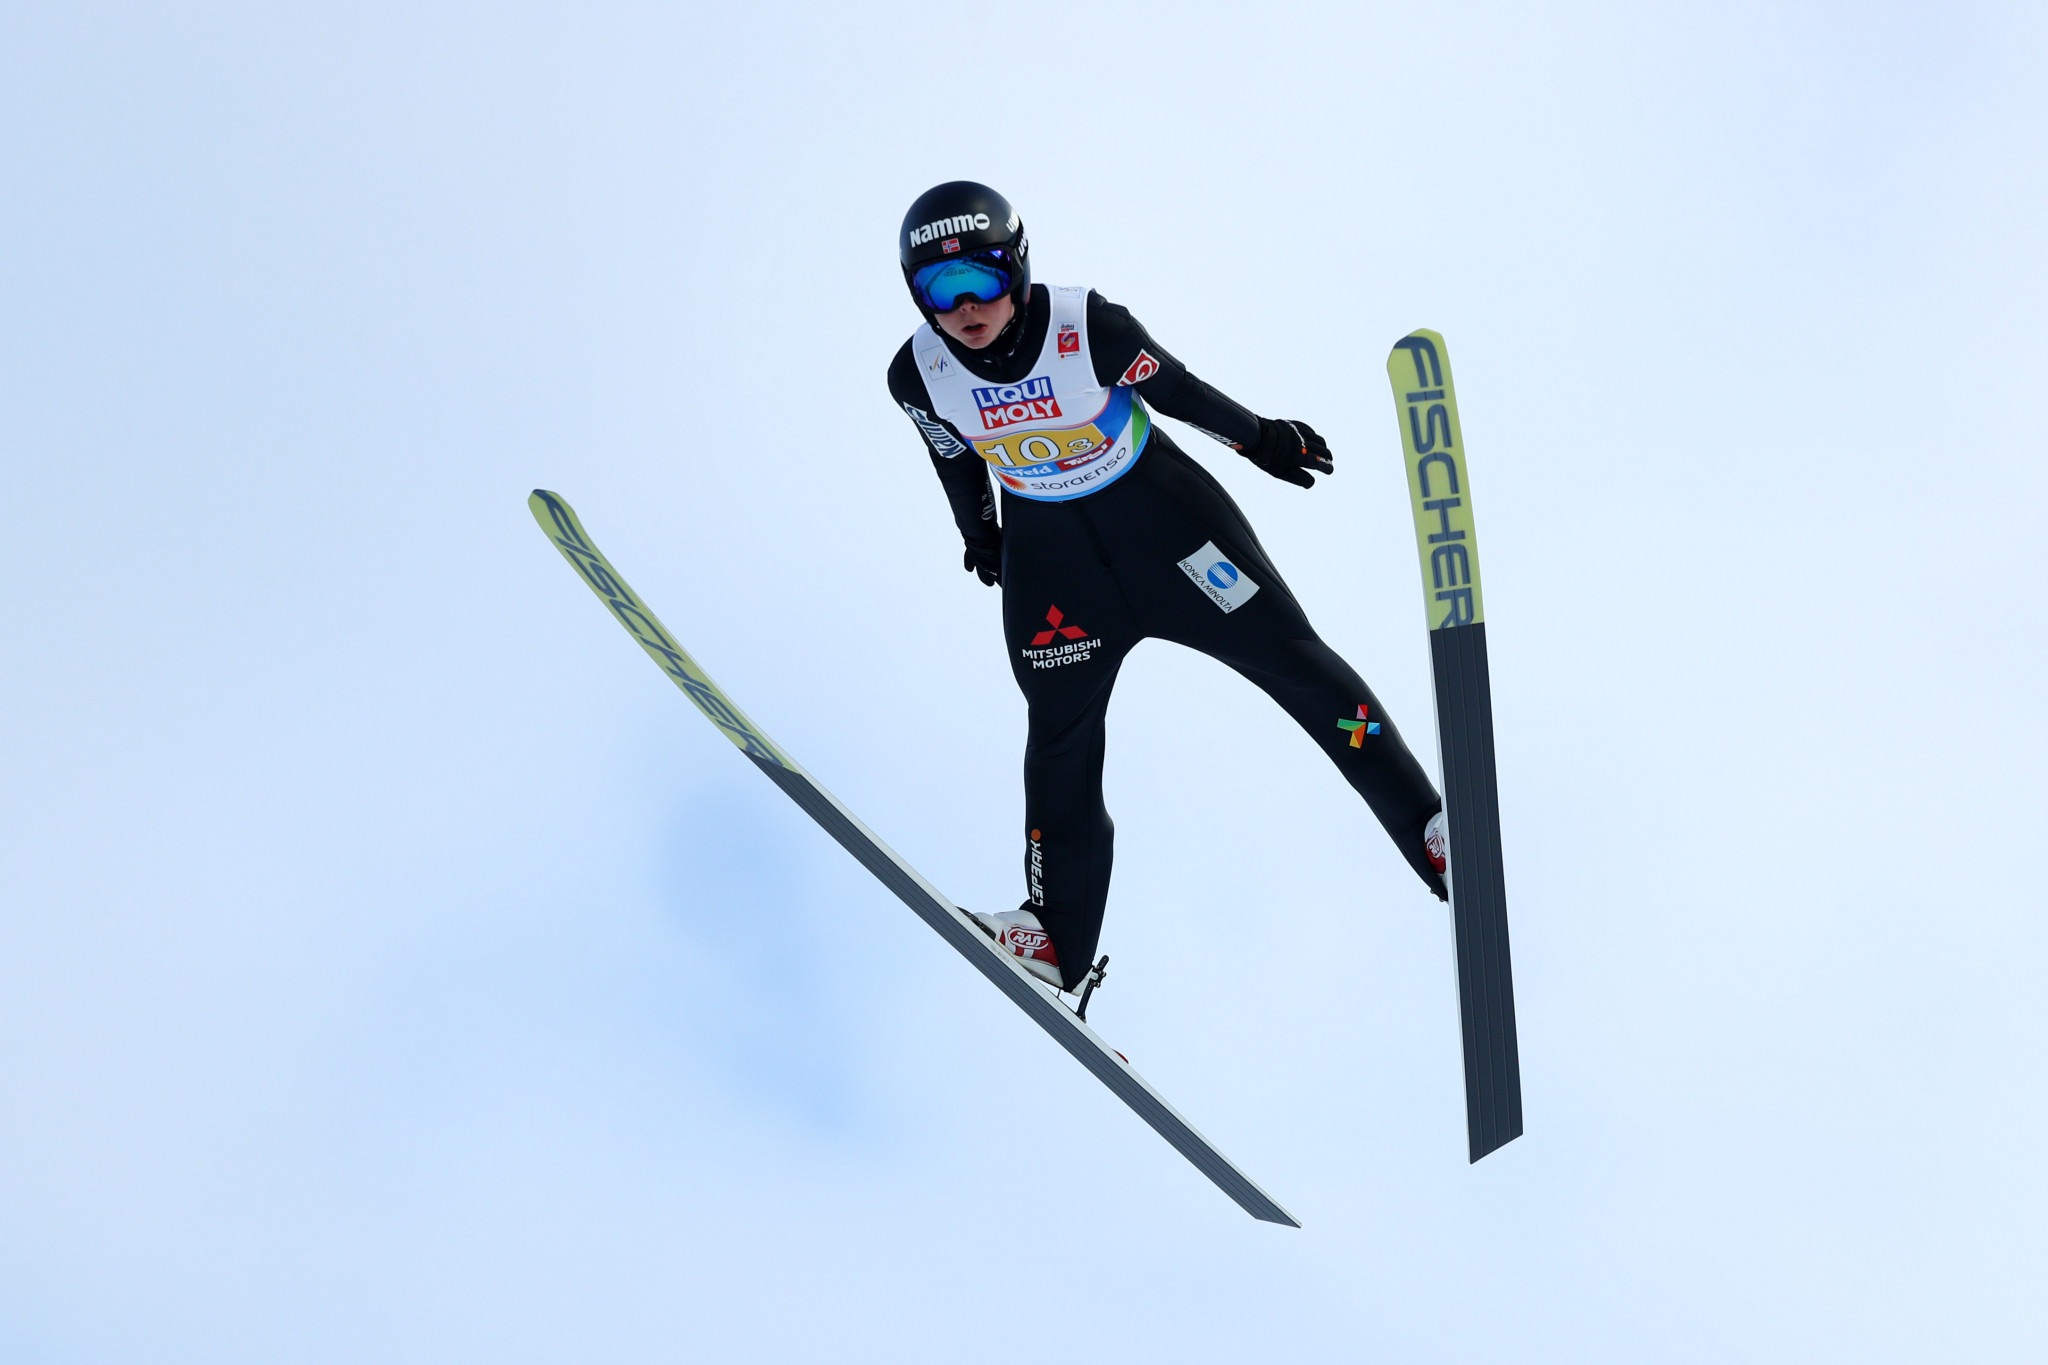 Norway's Lundby wins inaugural women's Raw Air Tournament with FIS Ski Jumping World Cup victory in Trondheim